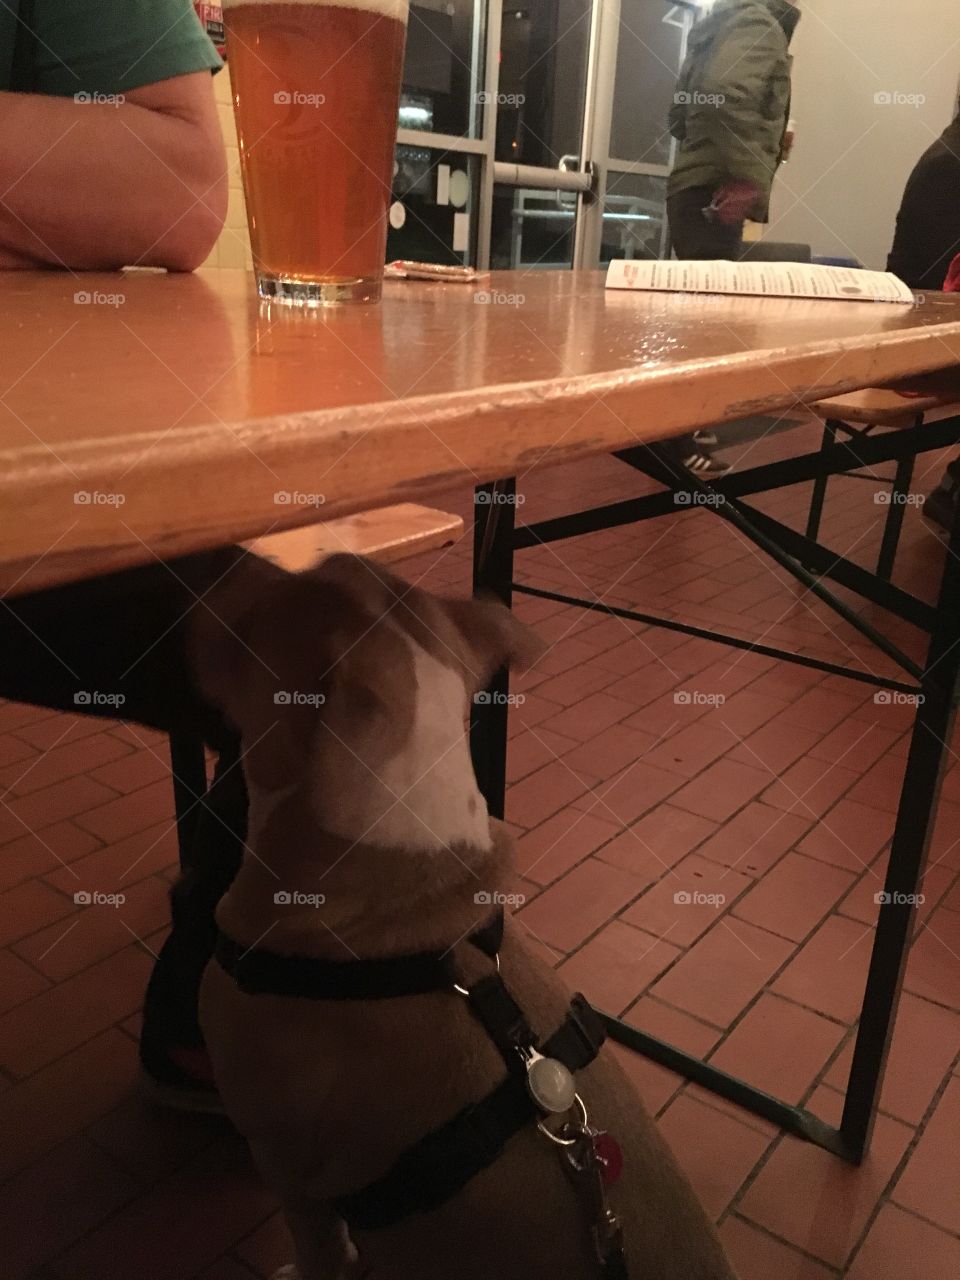 Dog at brewery in Lexington ky